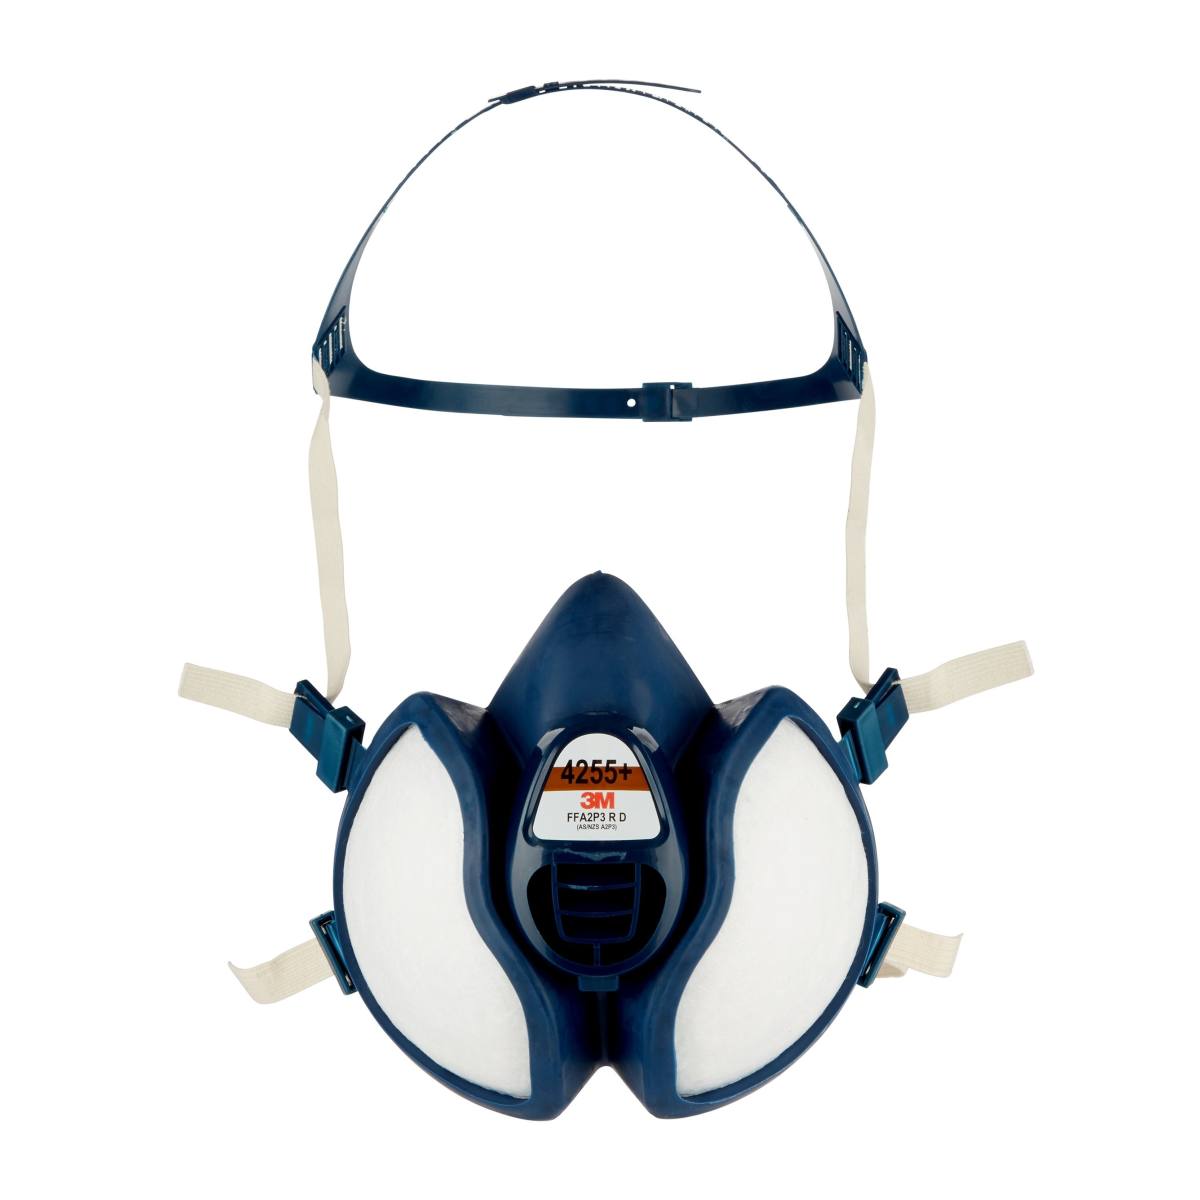 3M 4255 respirator FFA2P3RD against organic gases and vapors as well as particles up to 30 times the limit value